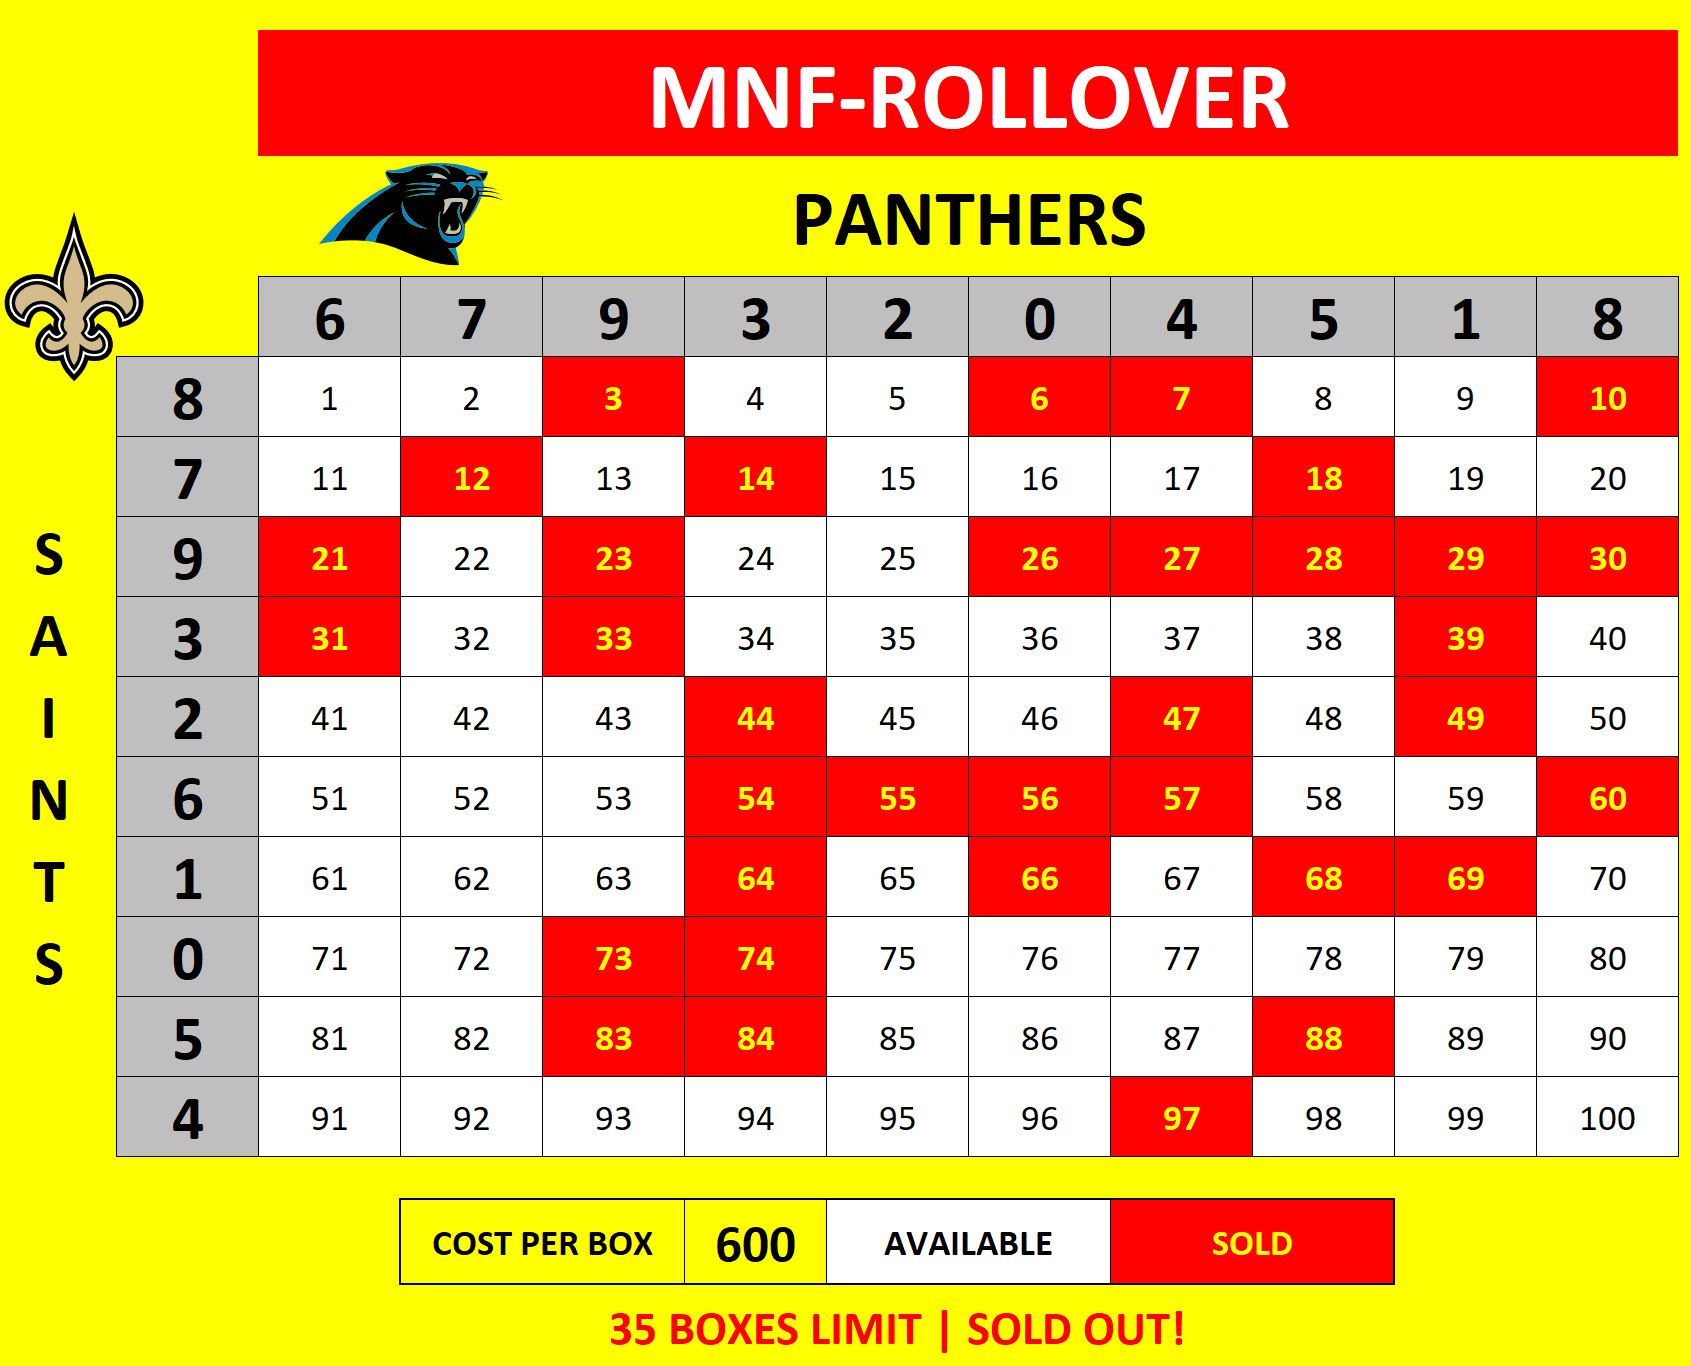 MNF-Rollover-B Panthers at Saints